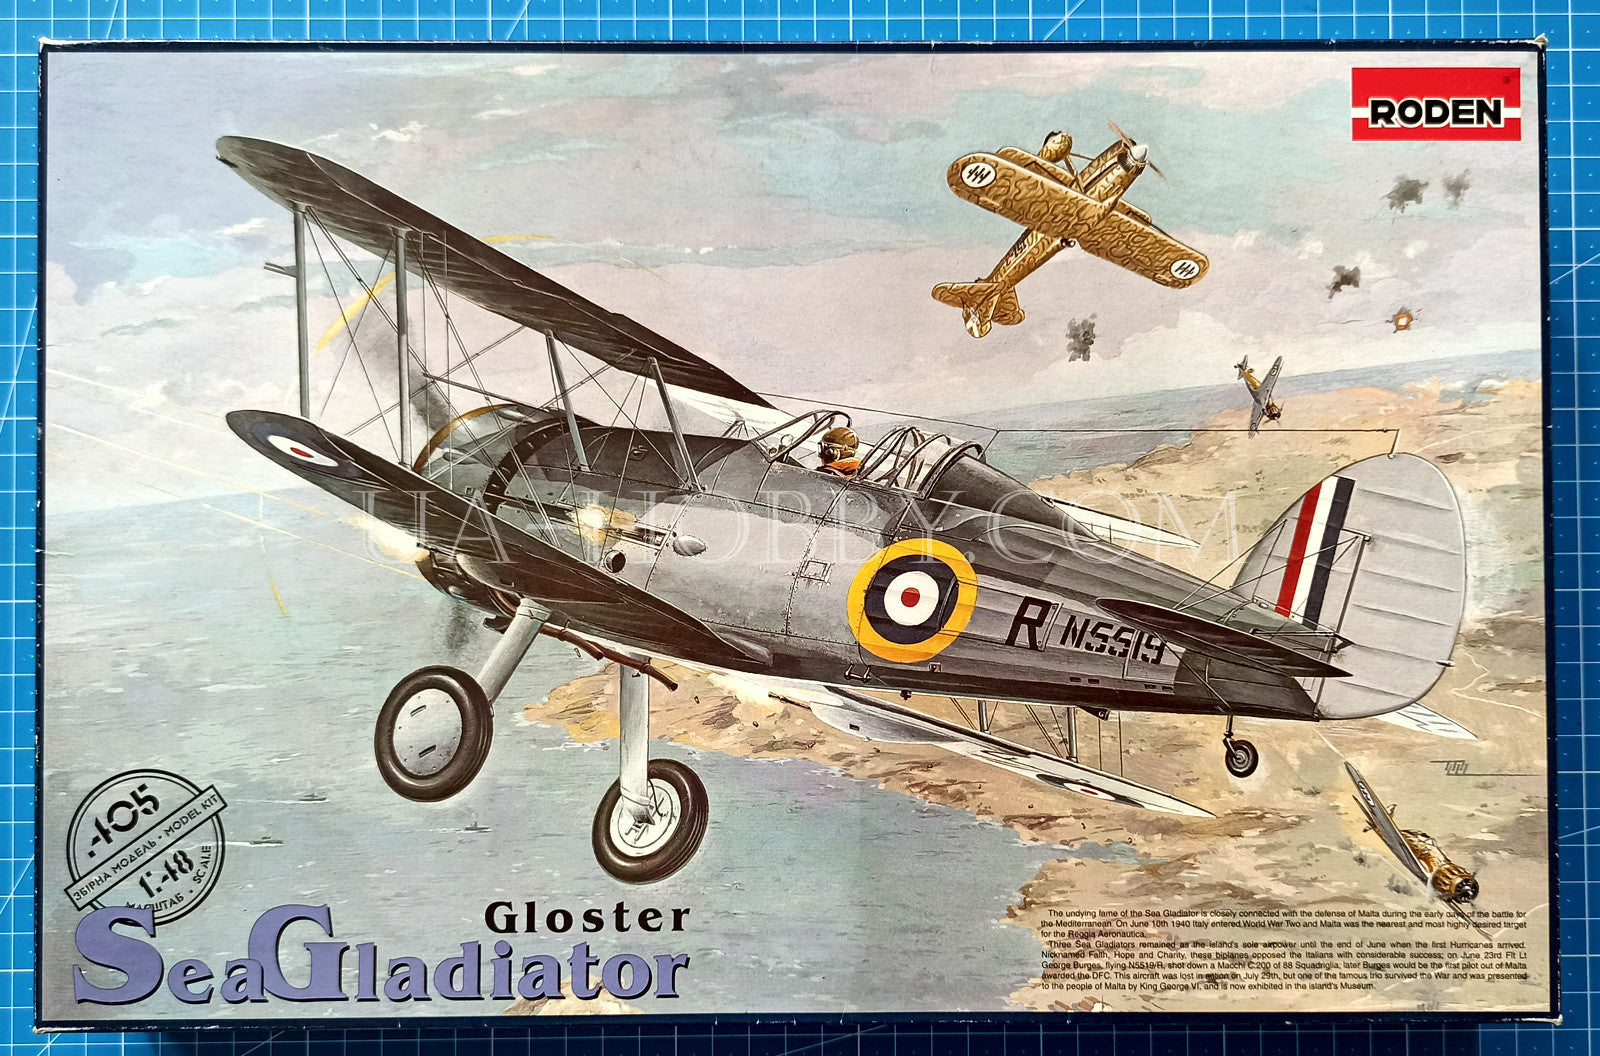 1/48 Gloster Sea Gladiator. Roden 405